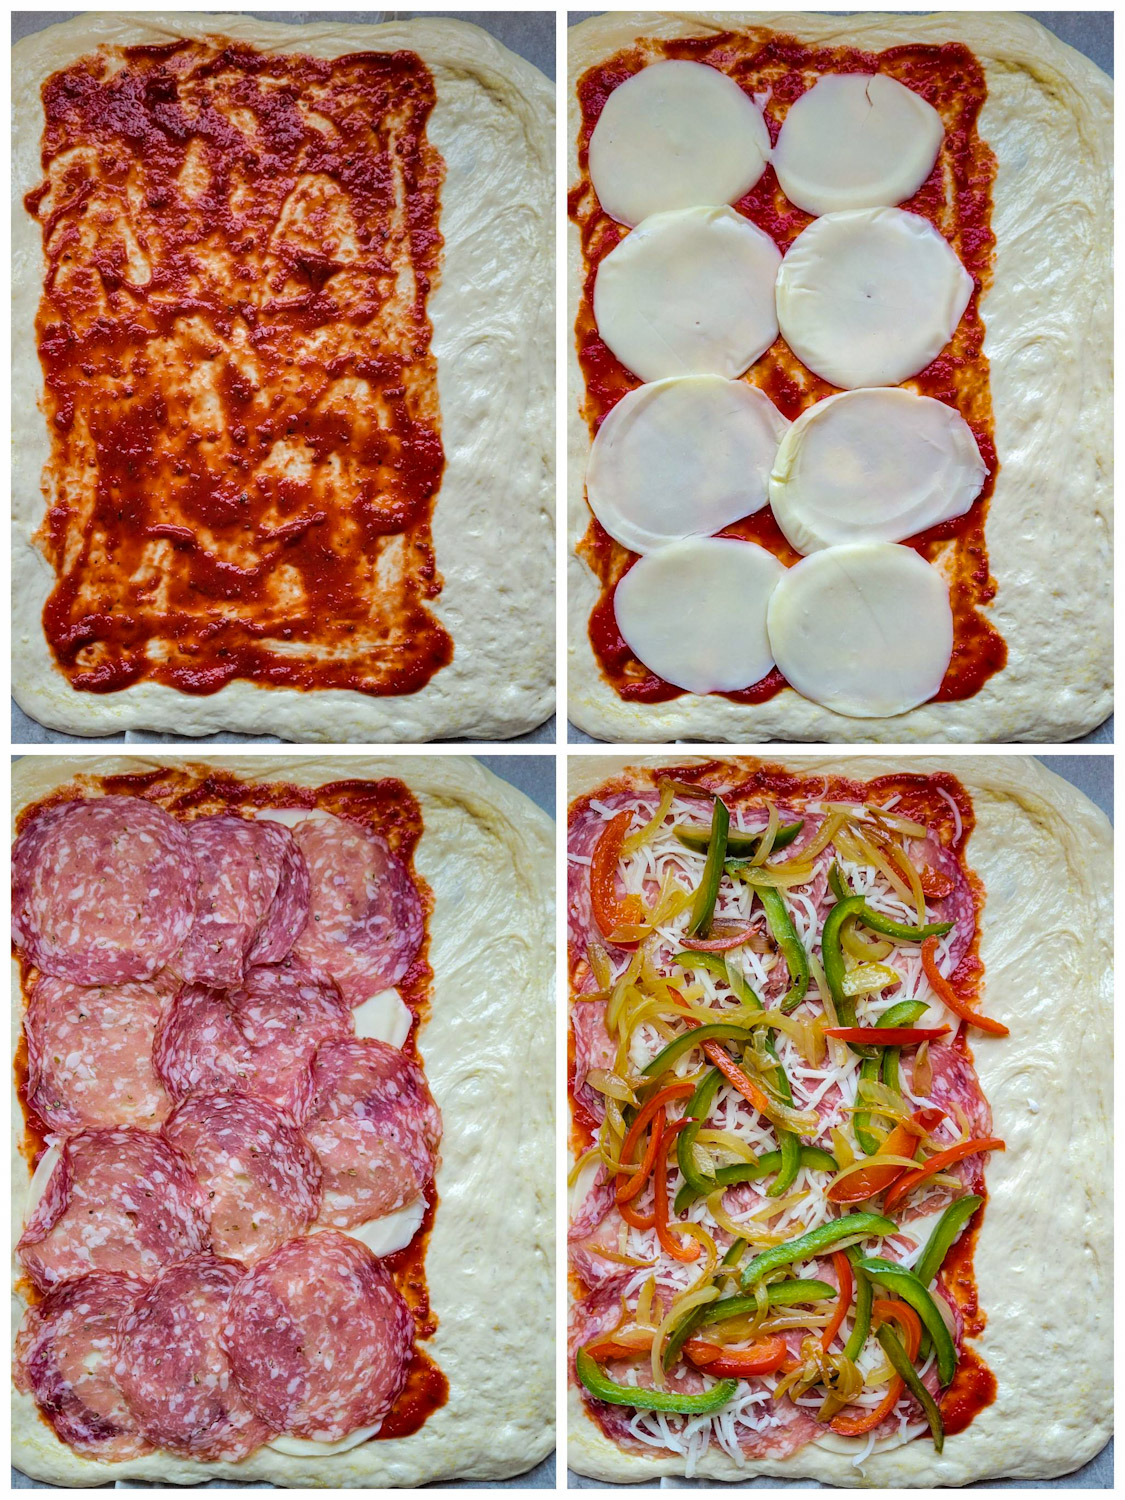 A collage showing the layers in making a Stromboli, a rolled pizza.